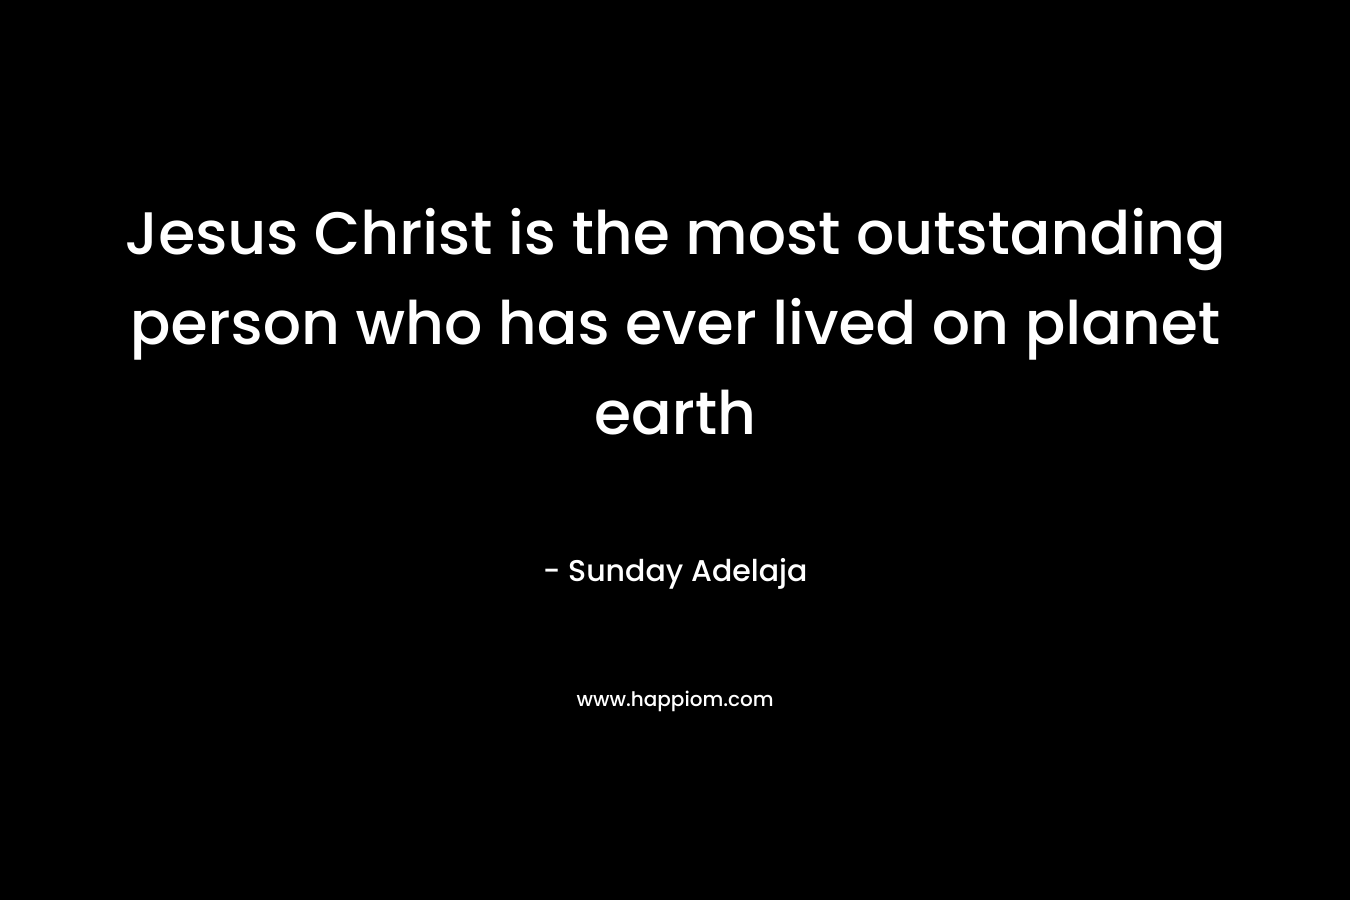 Jesus Christ is the most outstanding person who has ever lived on planet earth